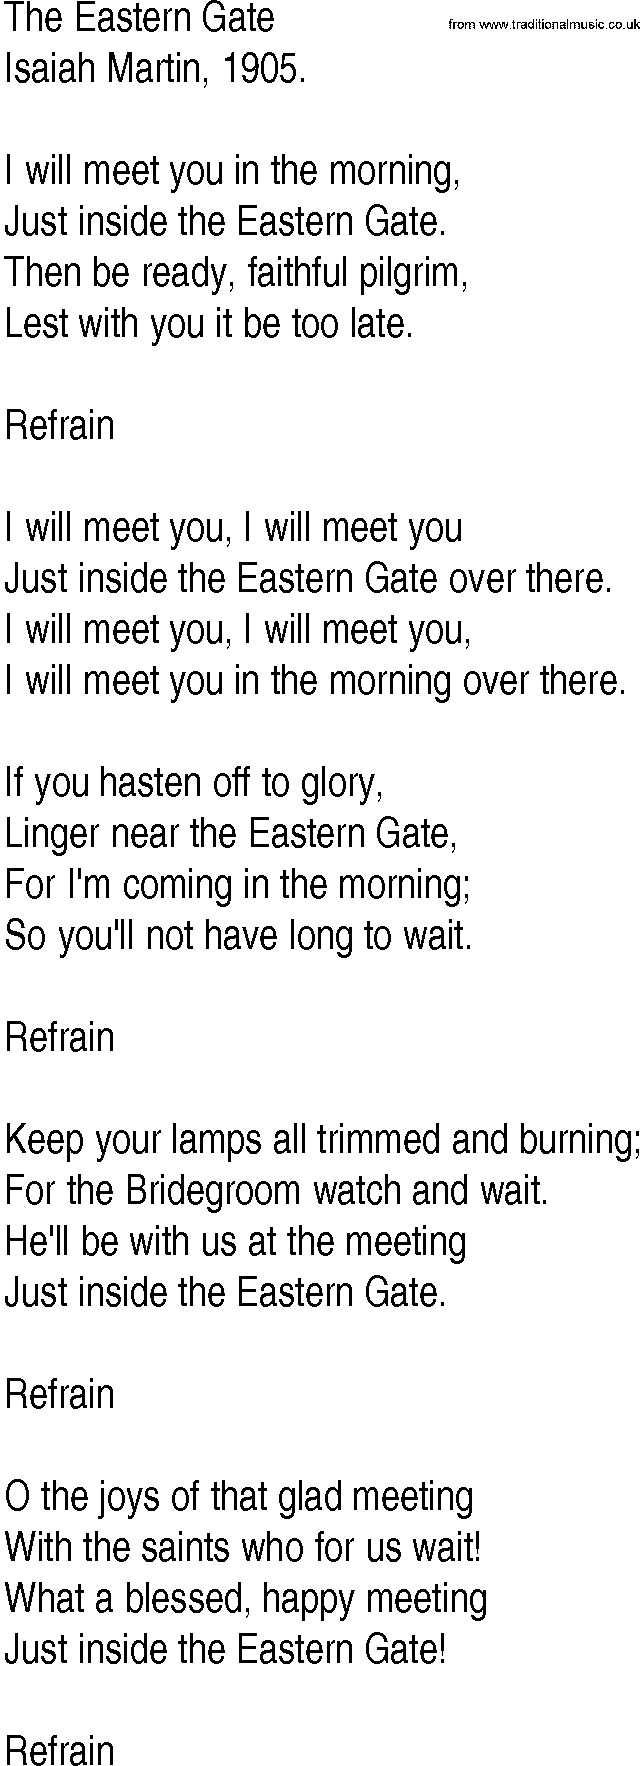 Hymn and Gospel Song: The Eastern Gate by Isaiah Martin lyrics